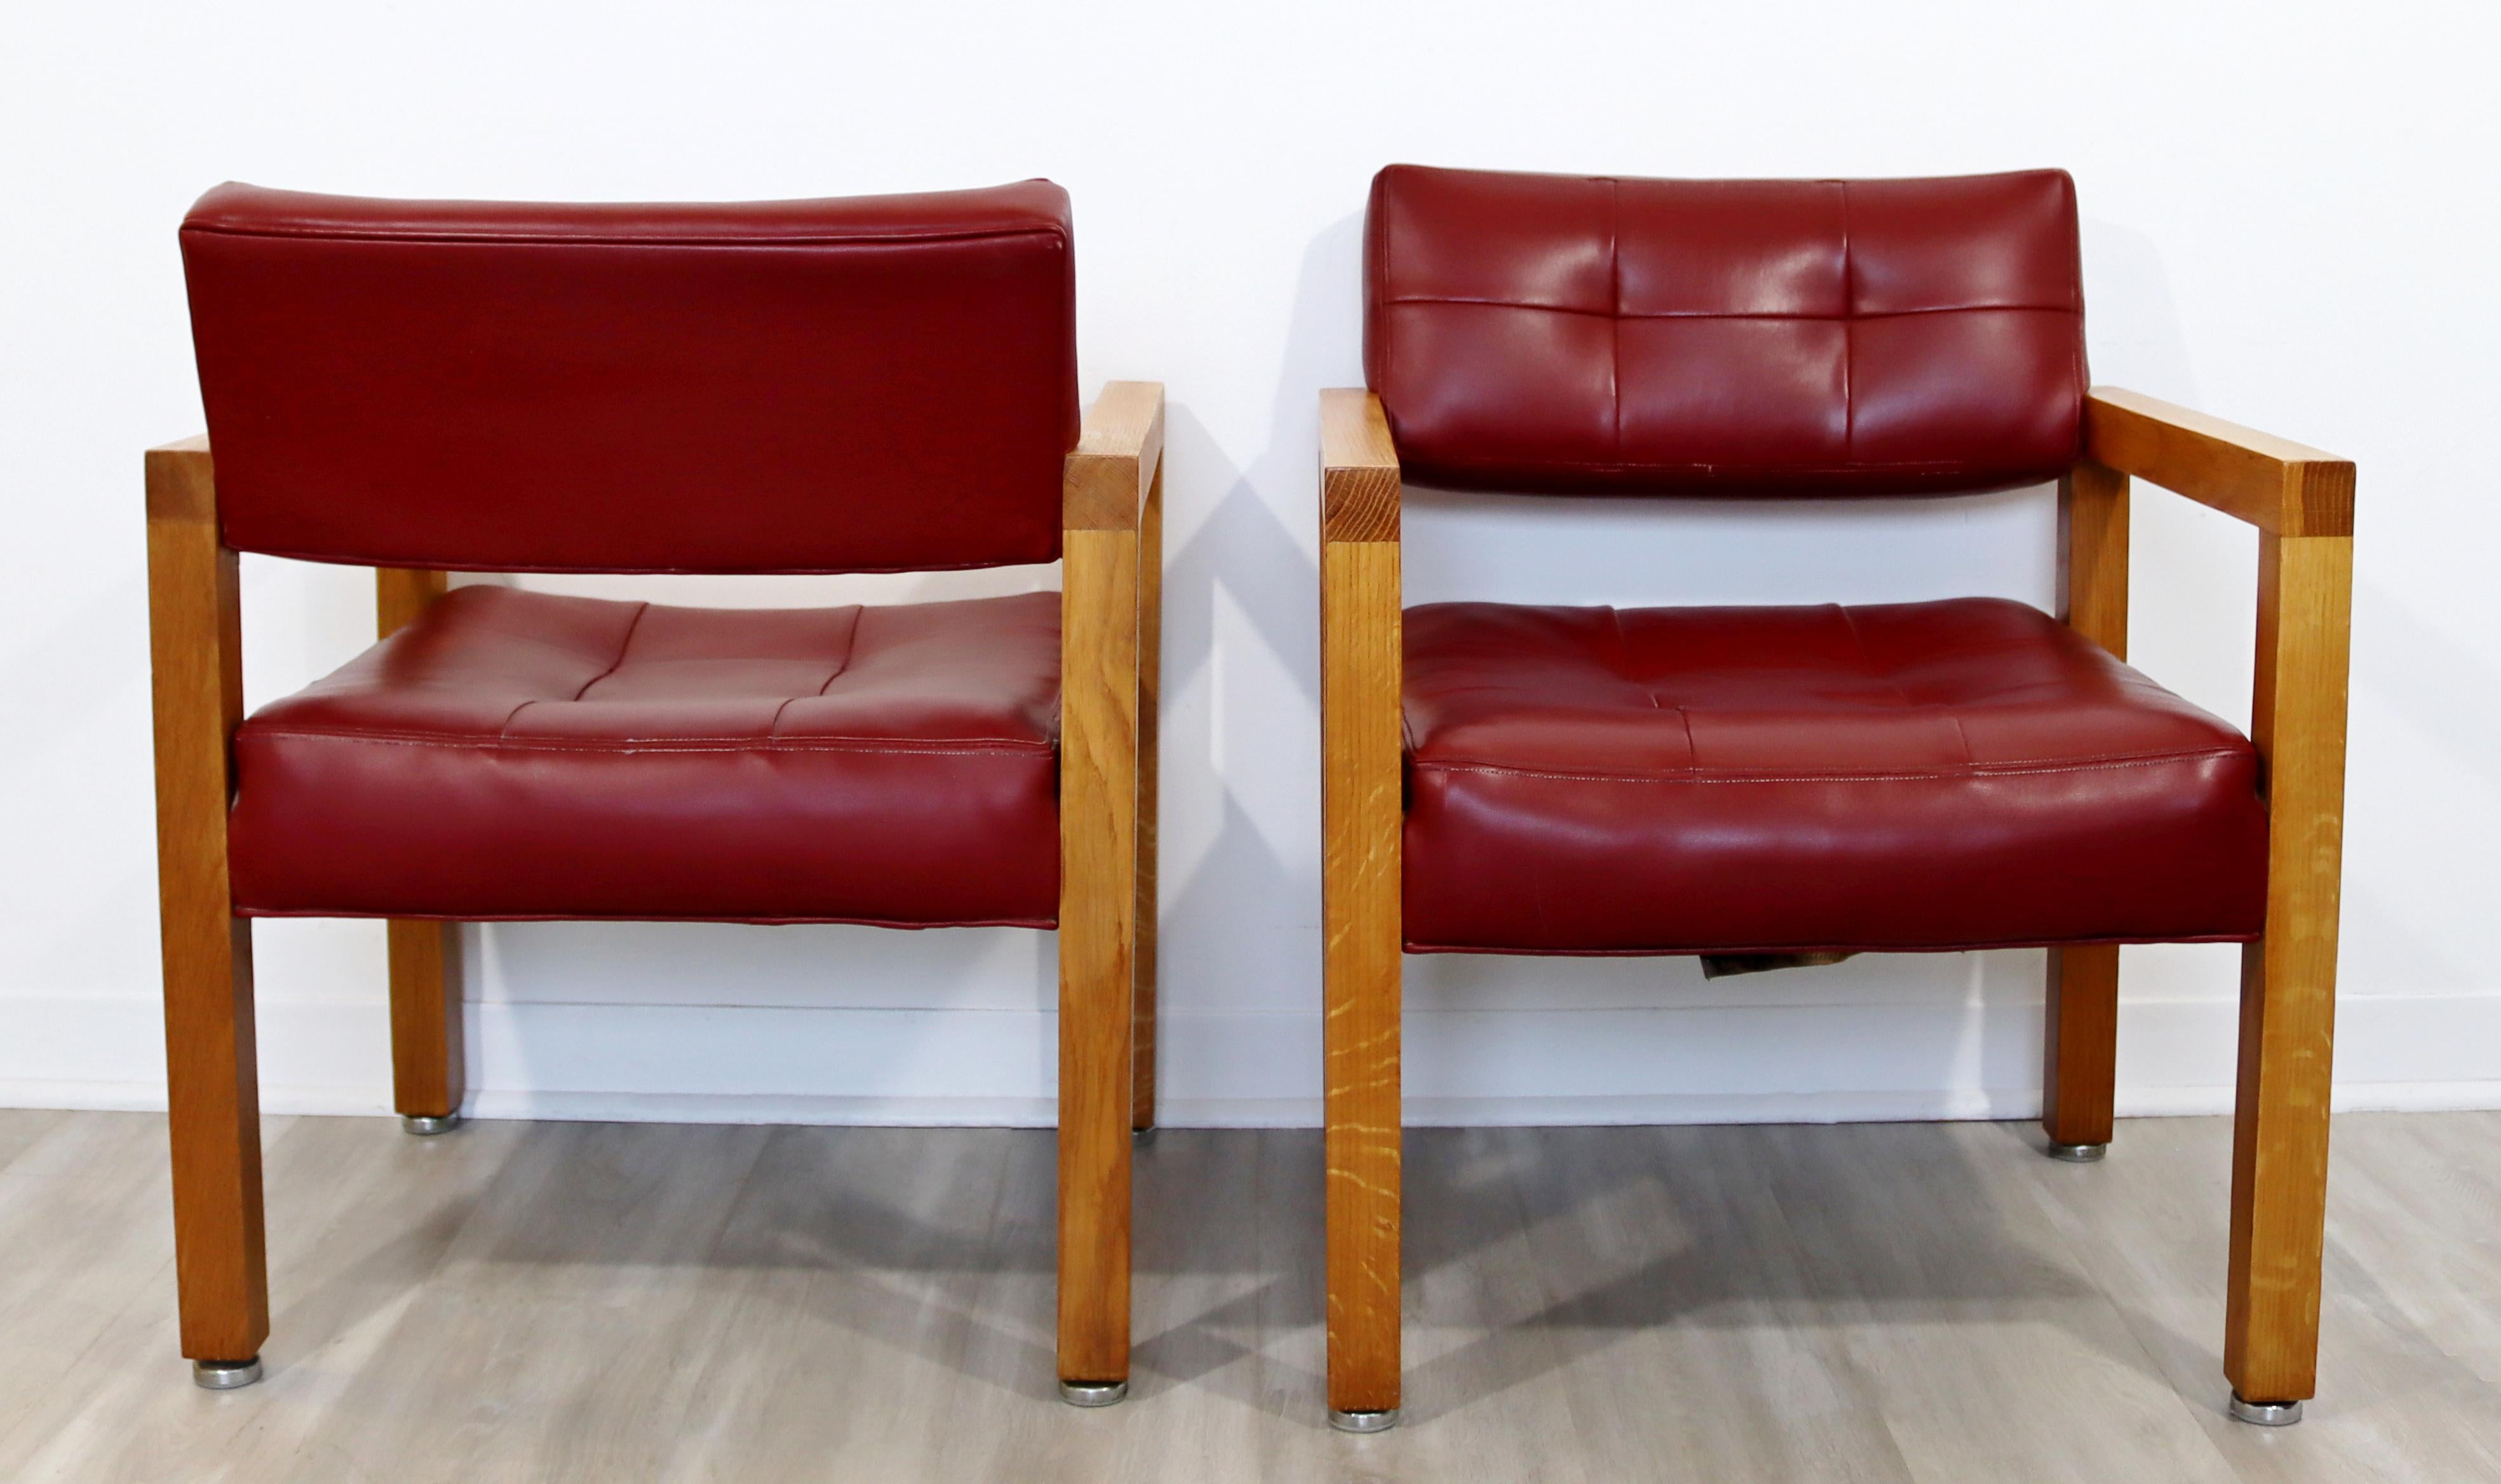 Late 20th Century Pair of Leather Mid-Century Modern Milo Baughman for Thayer Coggin Chairs